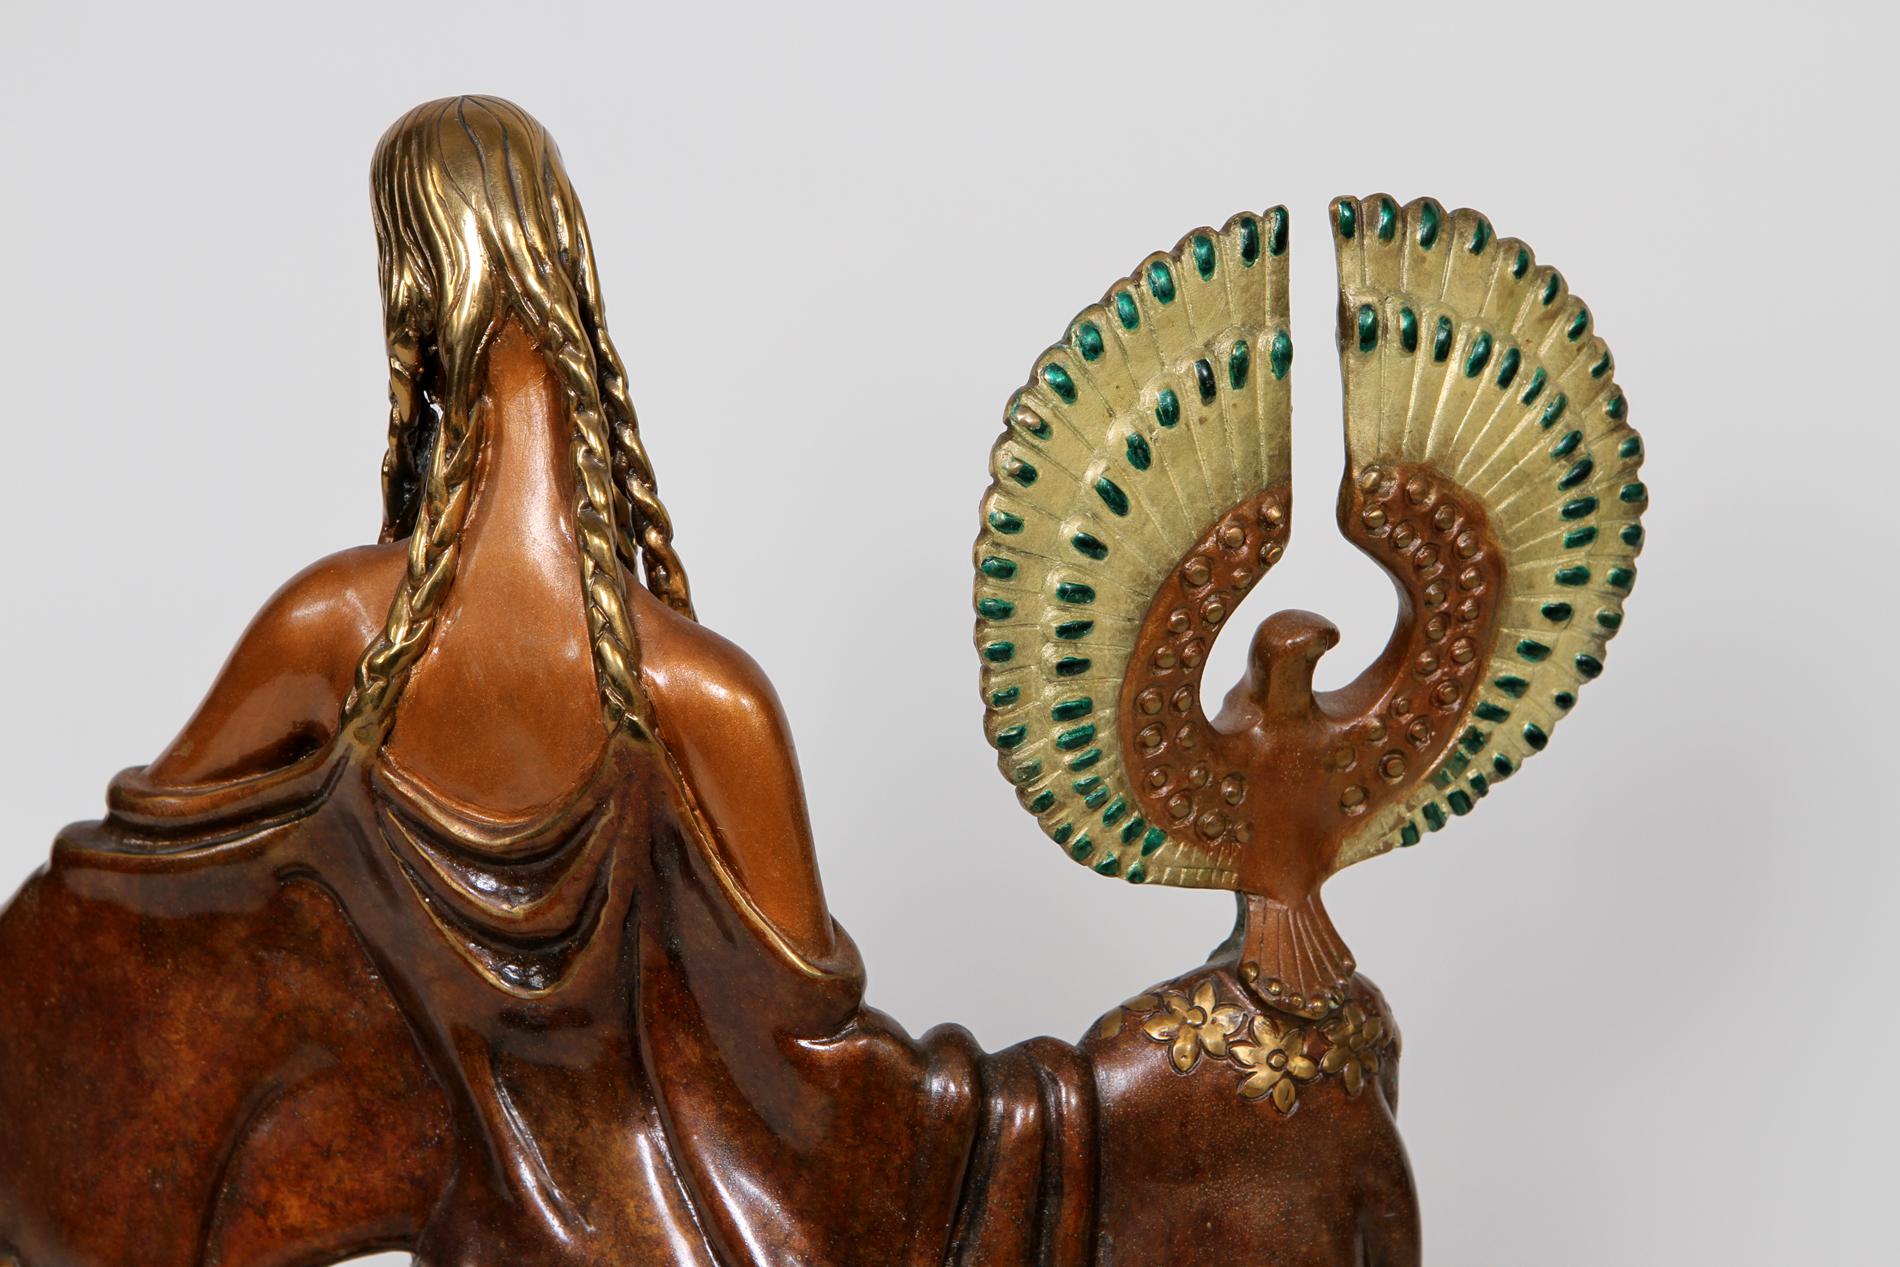 French Sculpture of a Woman in Polychrome Bronze Entitled 